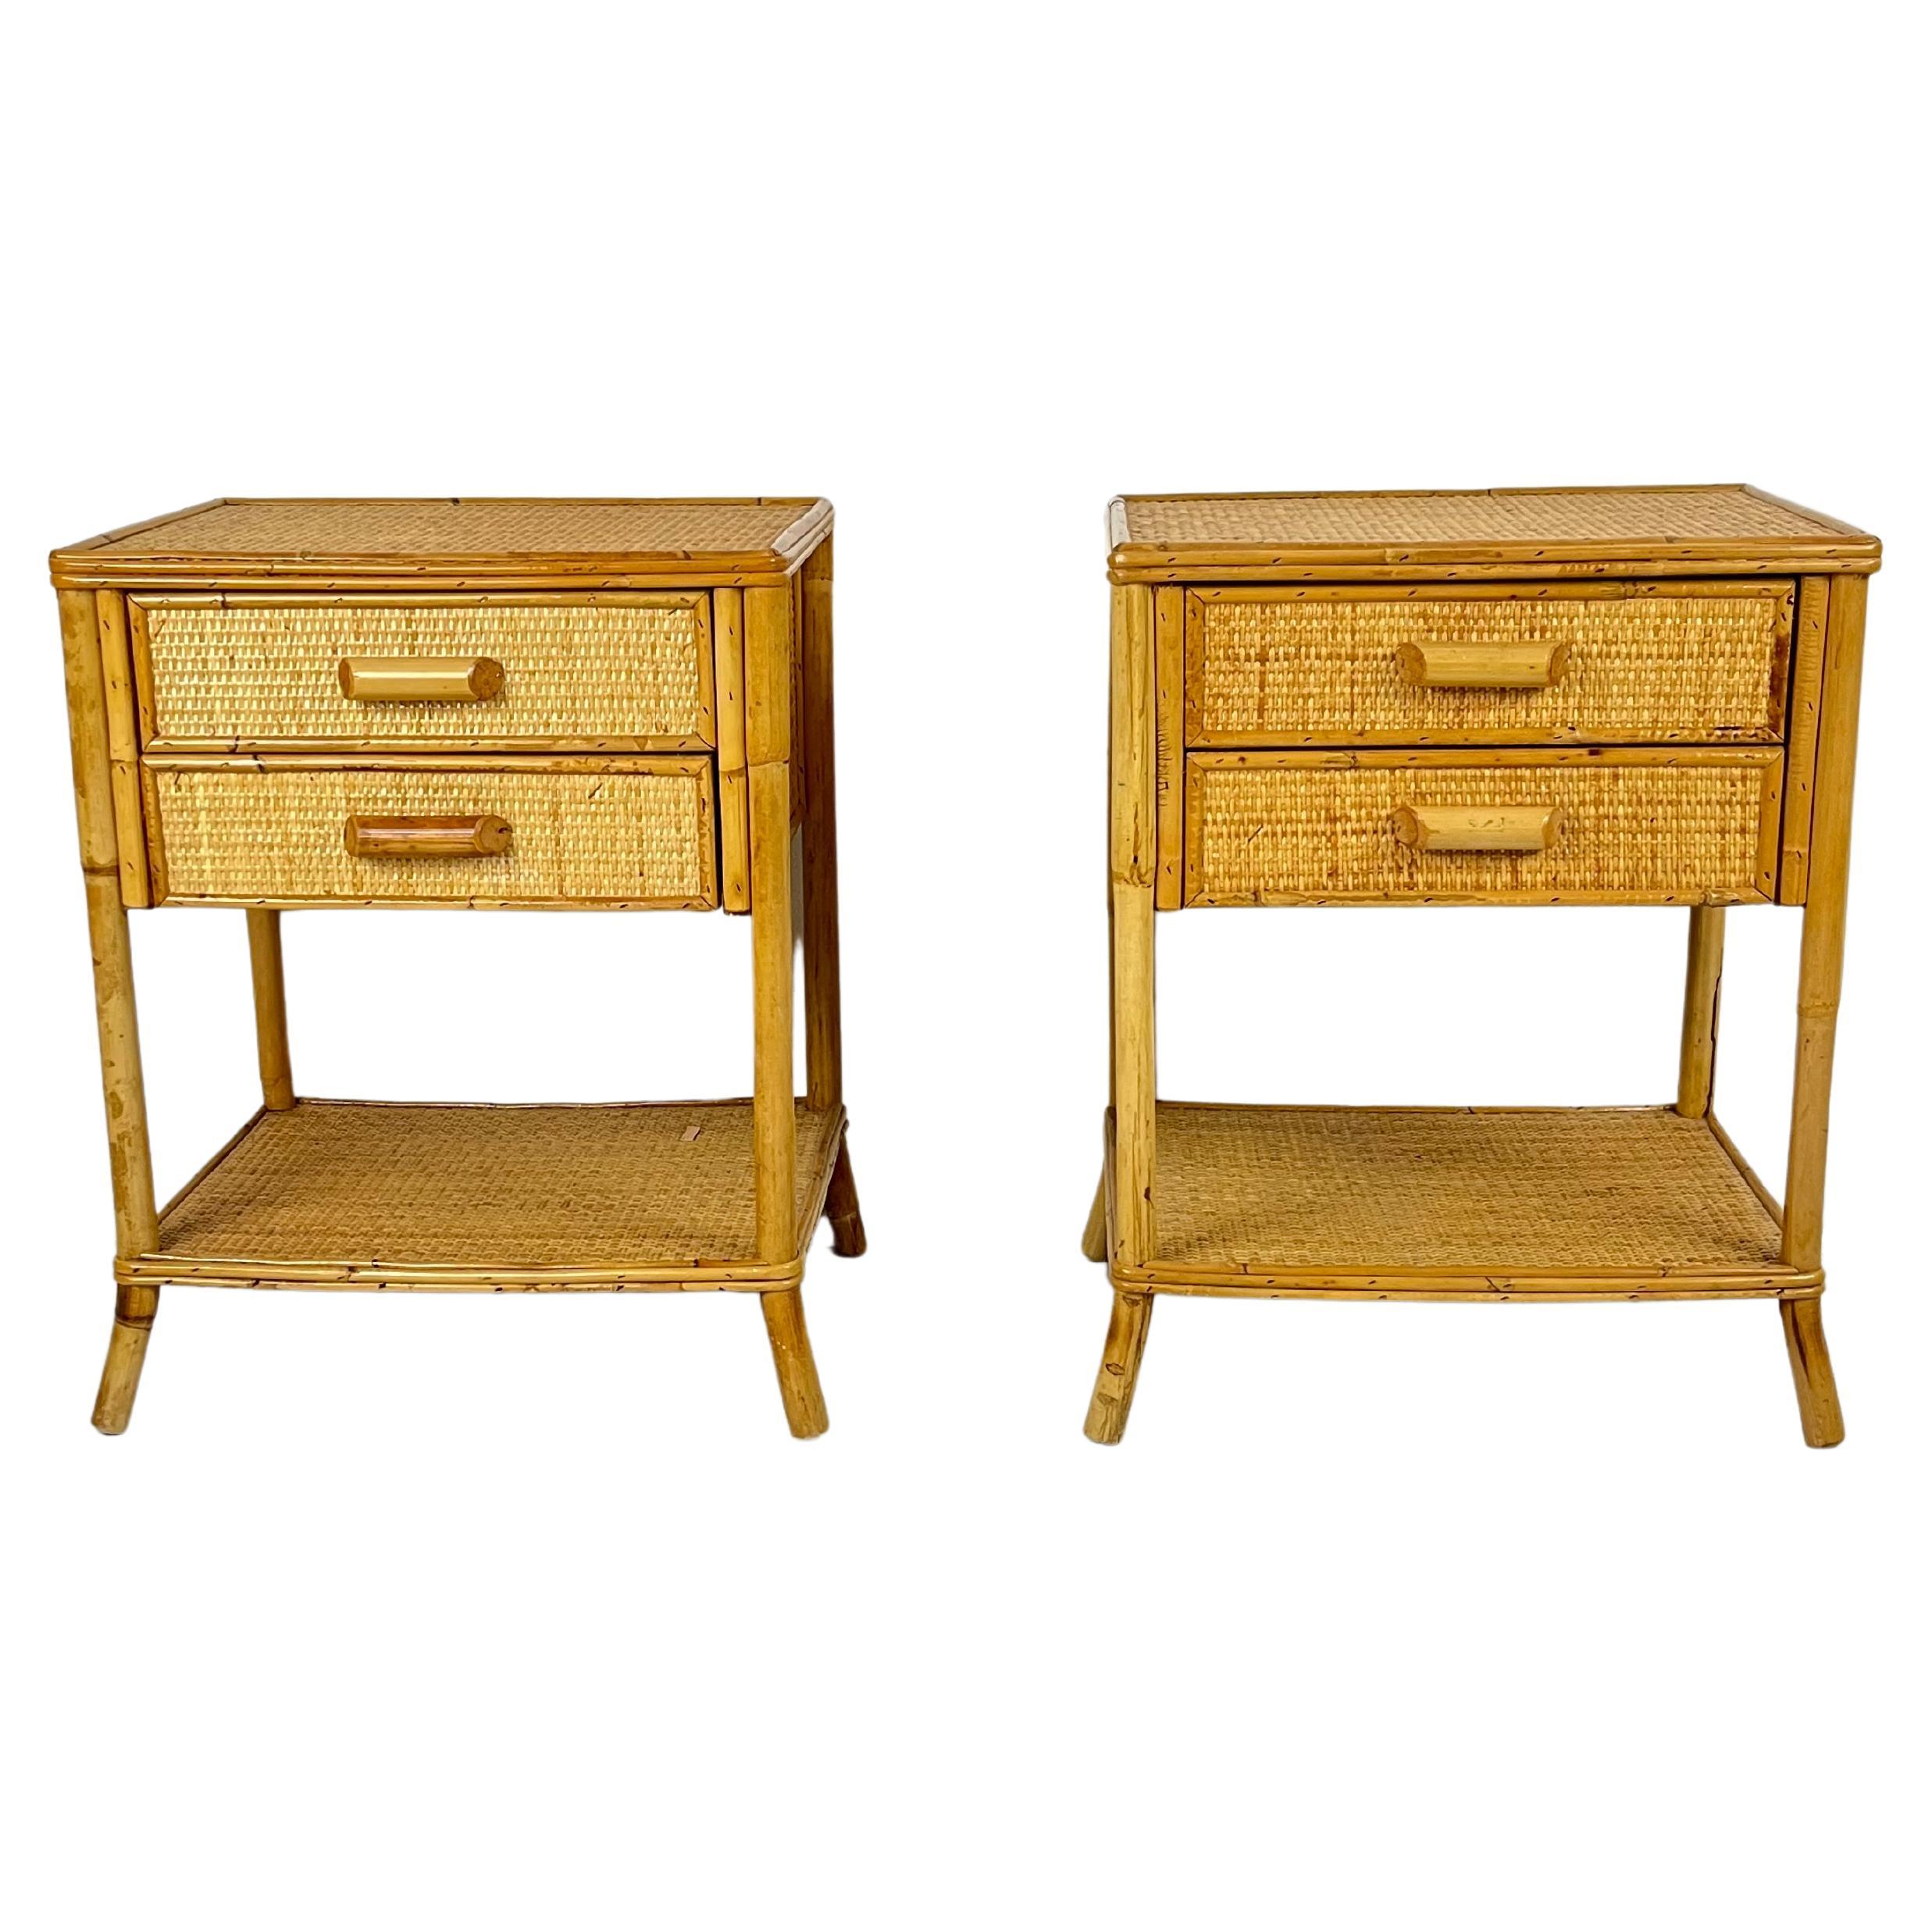 Pair of Vintage Italian Bamboo and Rattan Bedside Tables 1970s For Sale